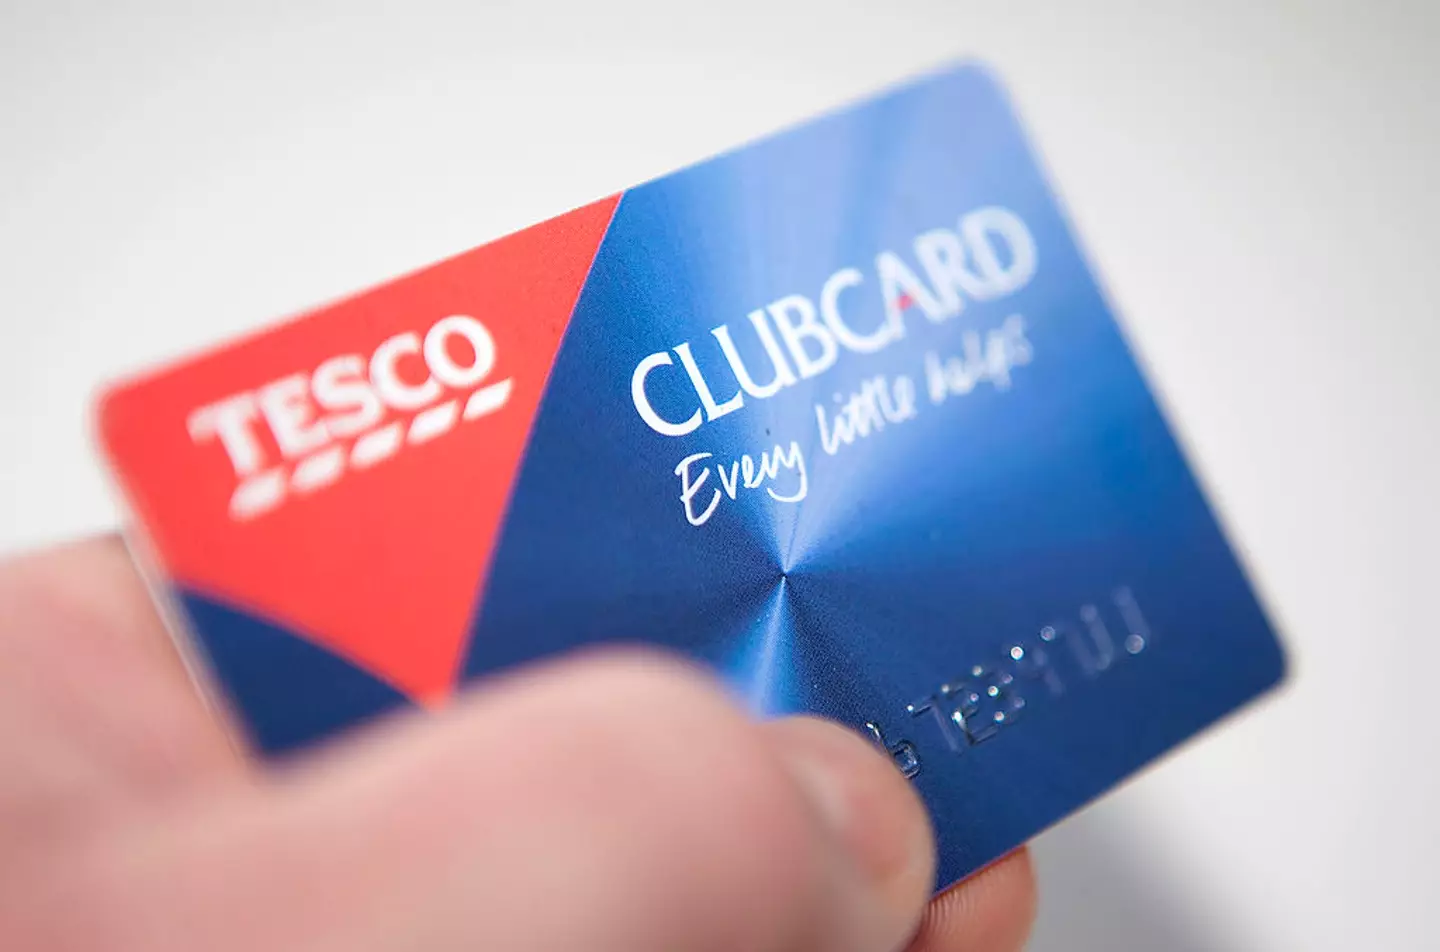 Over £16m worth of Tesco Clubcard vouchers will expire at the end of the month.